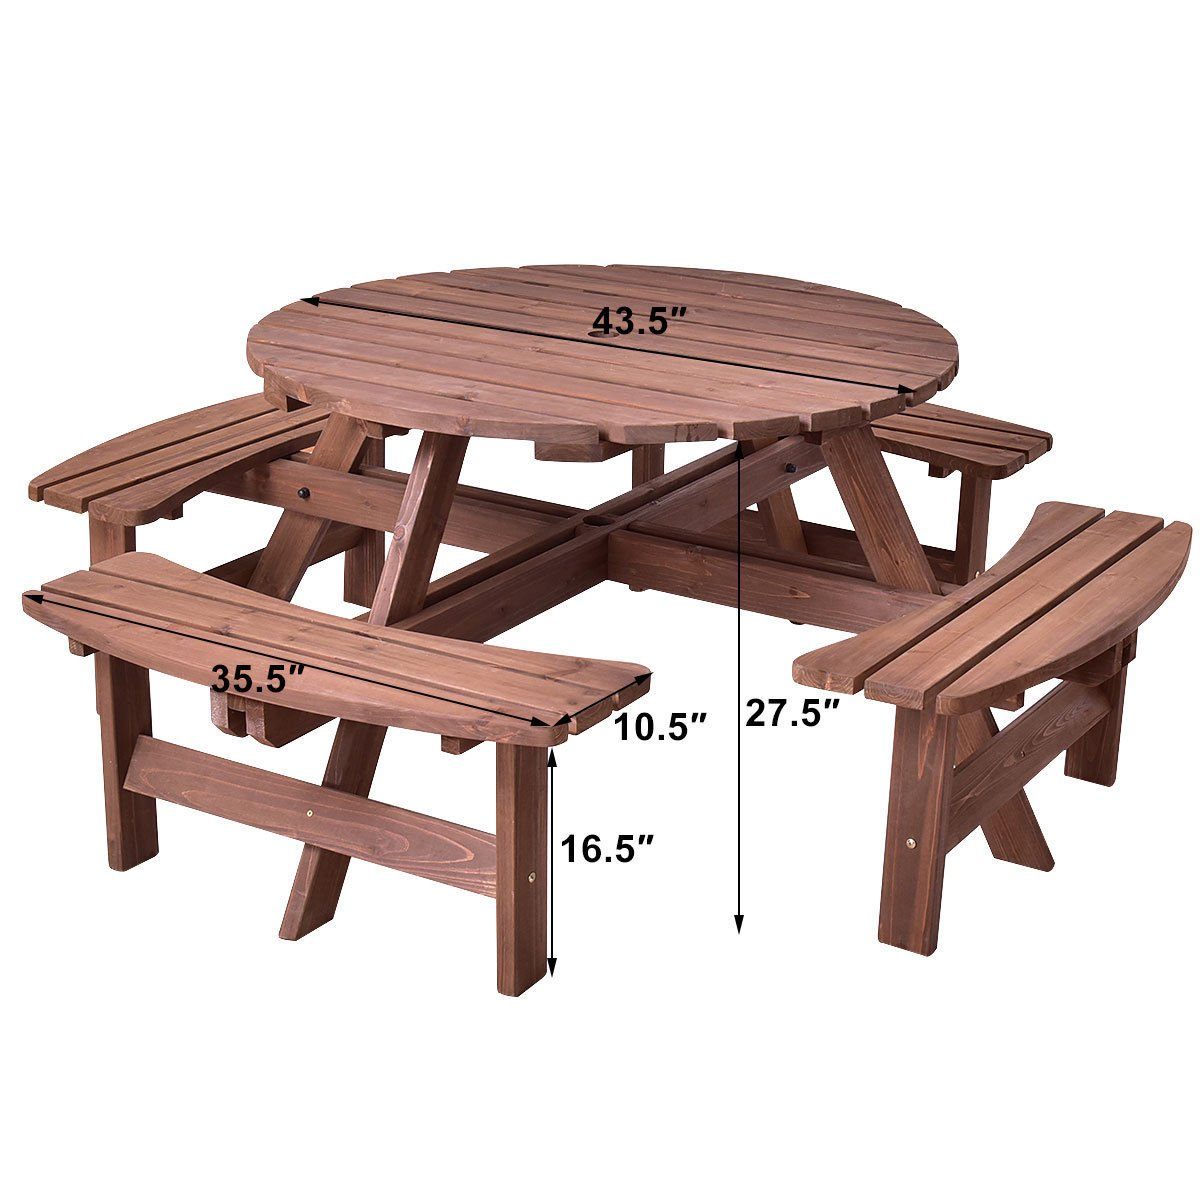 Giantex Wooden Picnic Table Set with Wood Bench, 4 Adults or 8 Kids Outdoor Round Table with Umbrella Hold Design